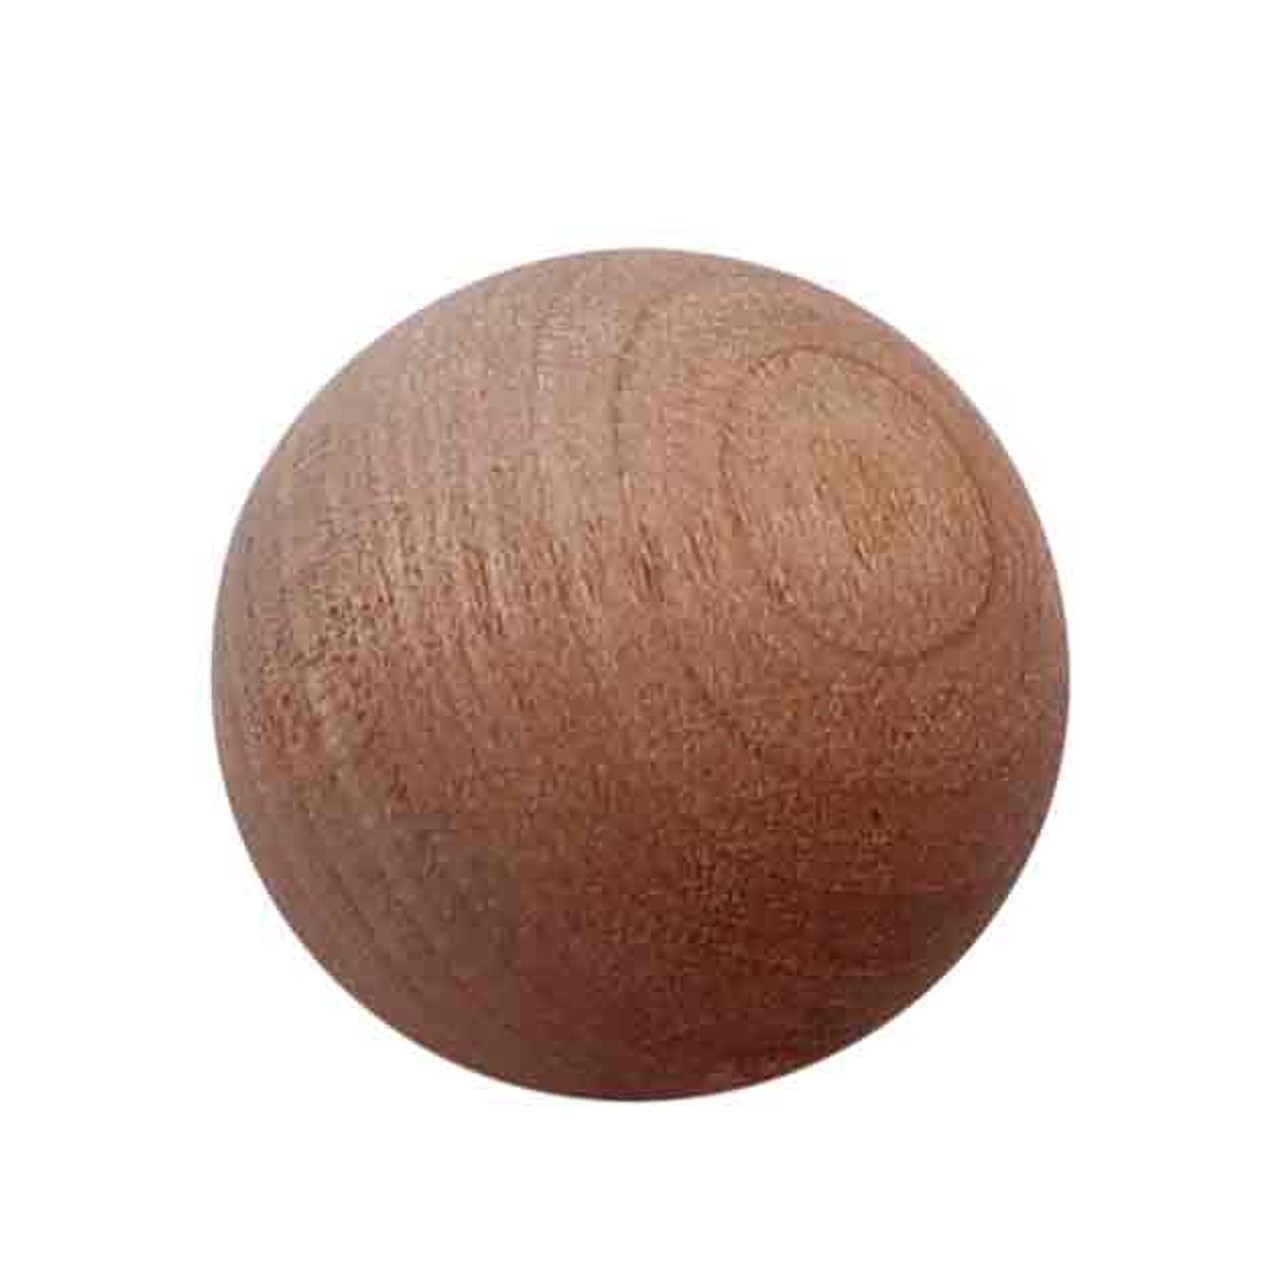 1-1/4 Split Wooden Ball - Lot of 10 Pieces